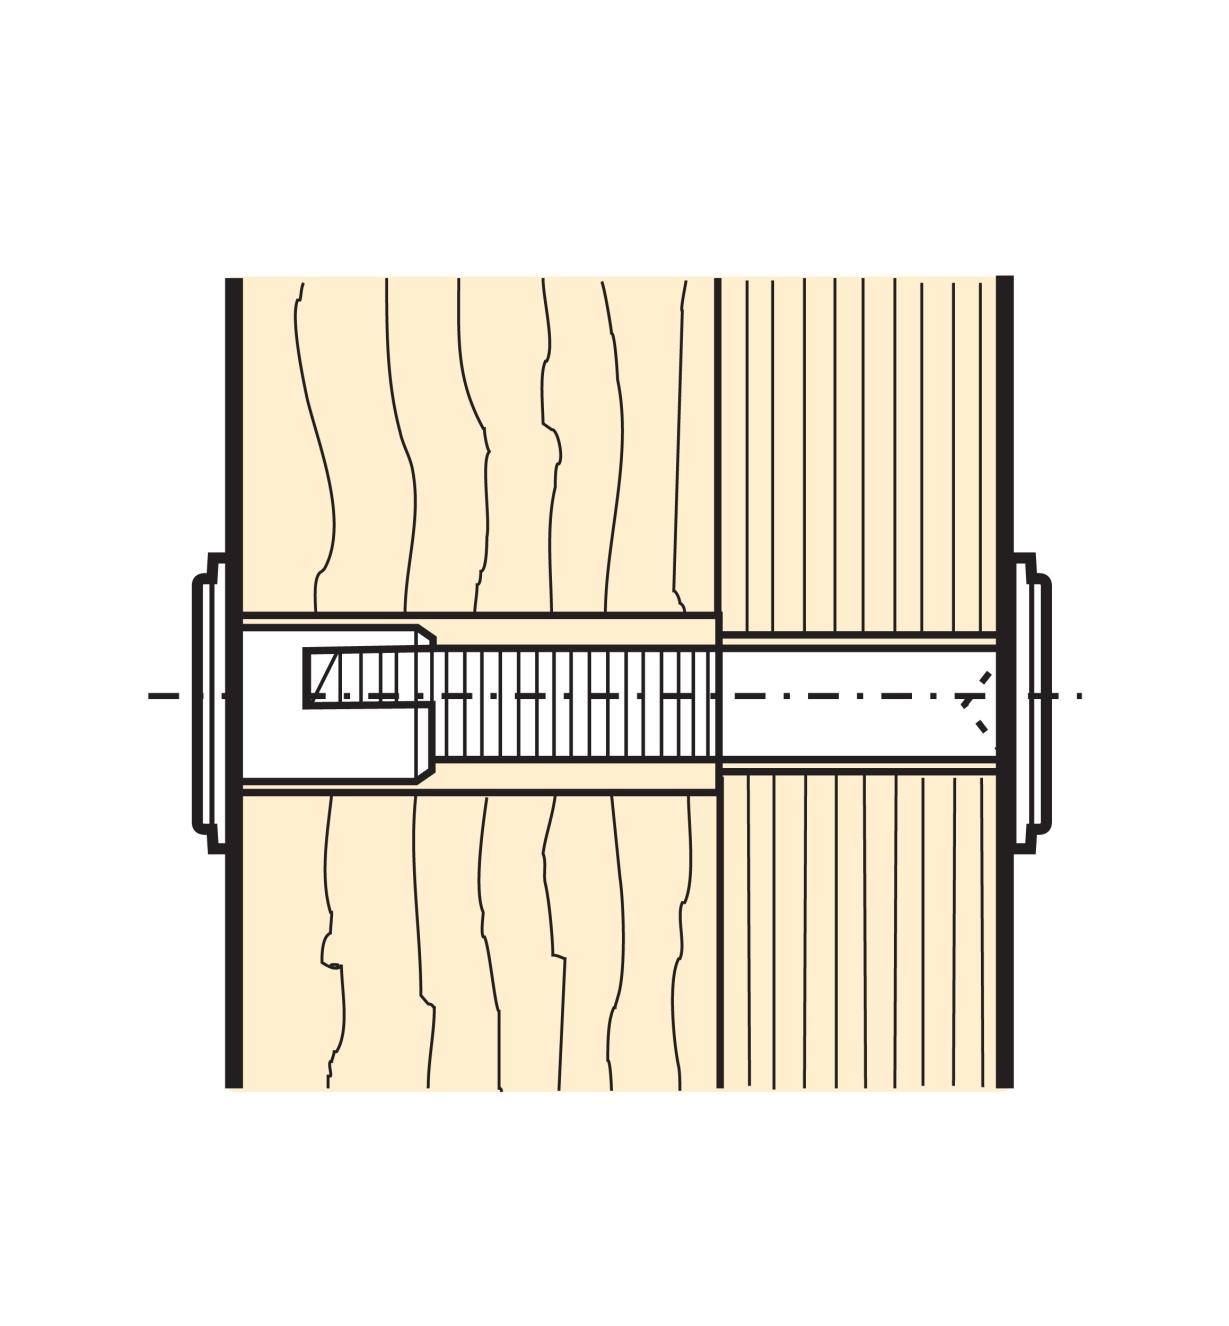 Cutaway illustration of installed Quick-Connect Bolt Cap